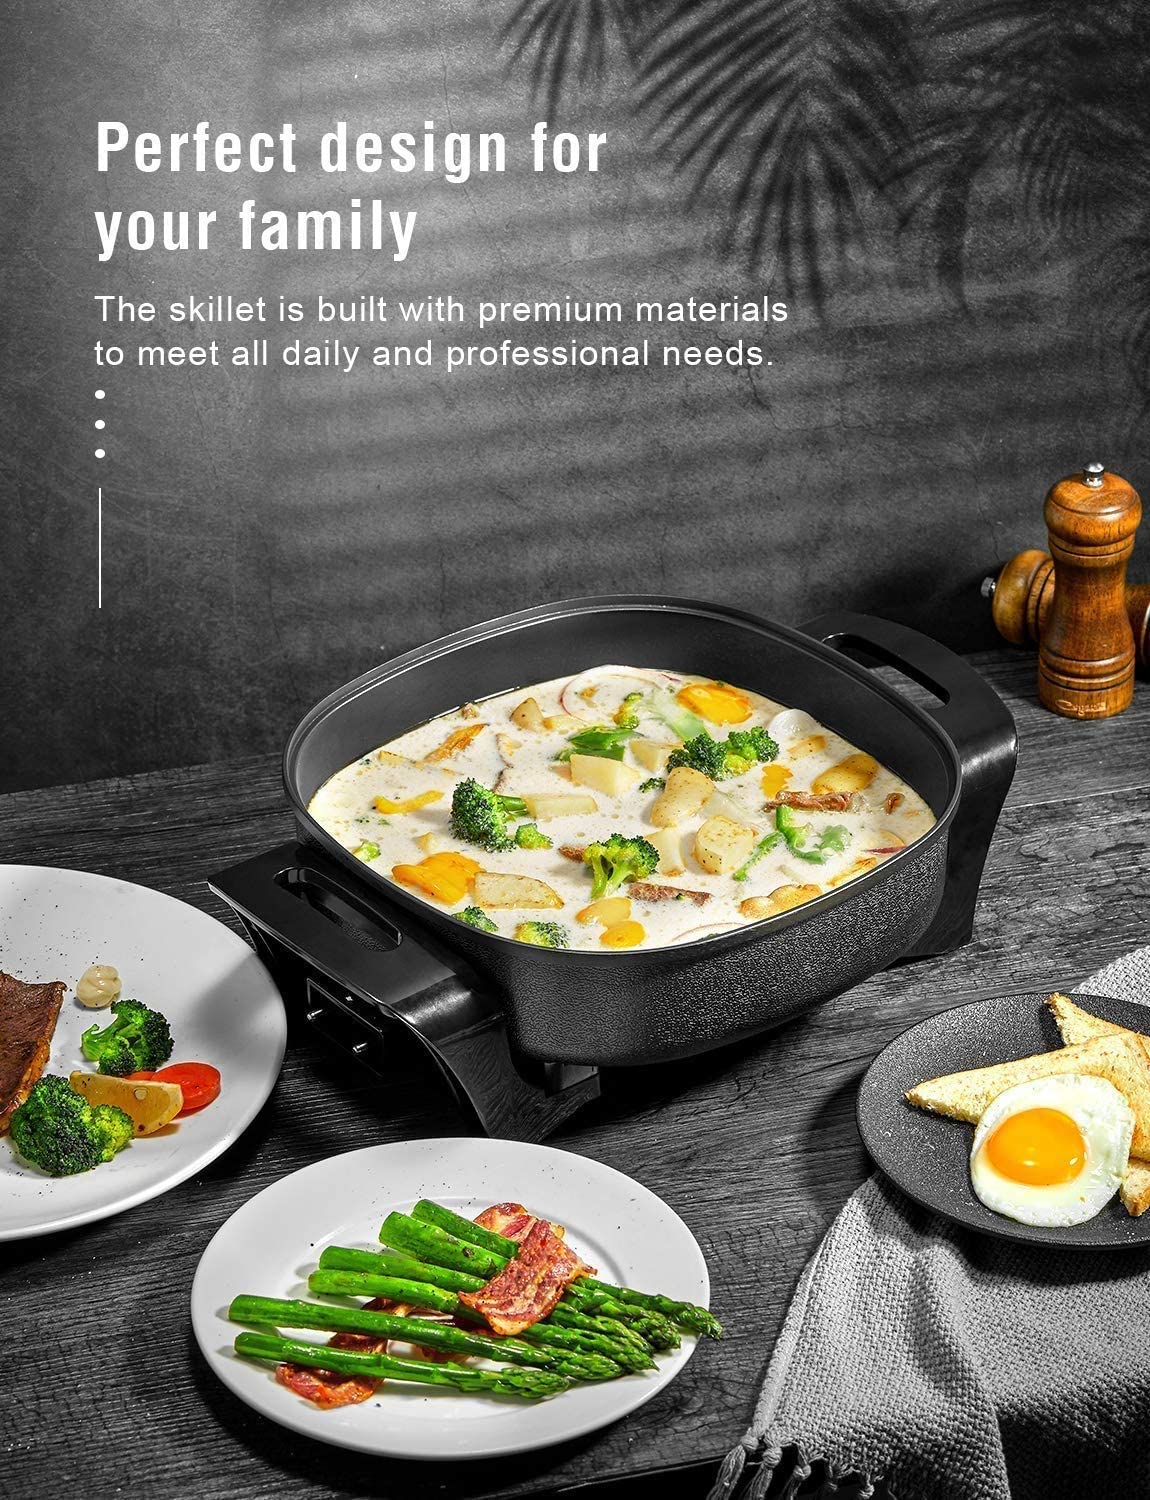 DECEN | Electric Skillet Non Stick Electric Frying Pan with Standing Tempered Glass Lid, Family Sized 6 Quart, 3 Inch depth, Heat Resistant Handles, 1360W, 12” x 12” x 3”